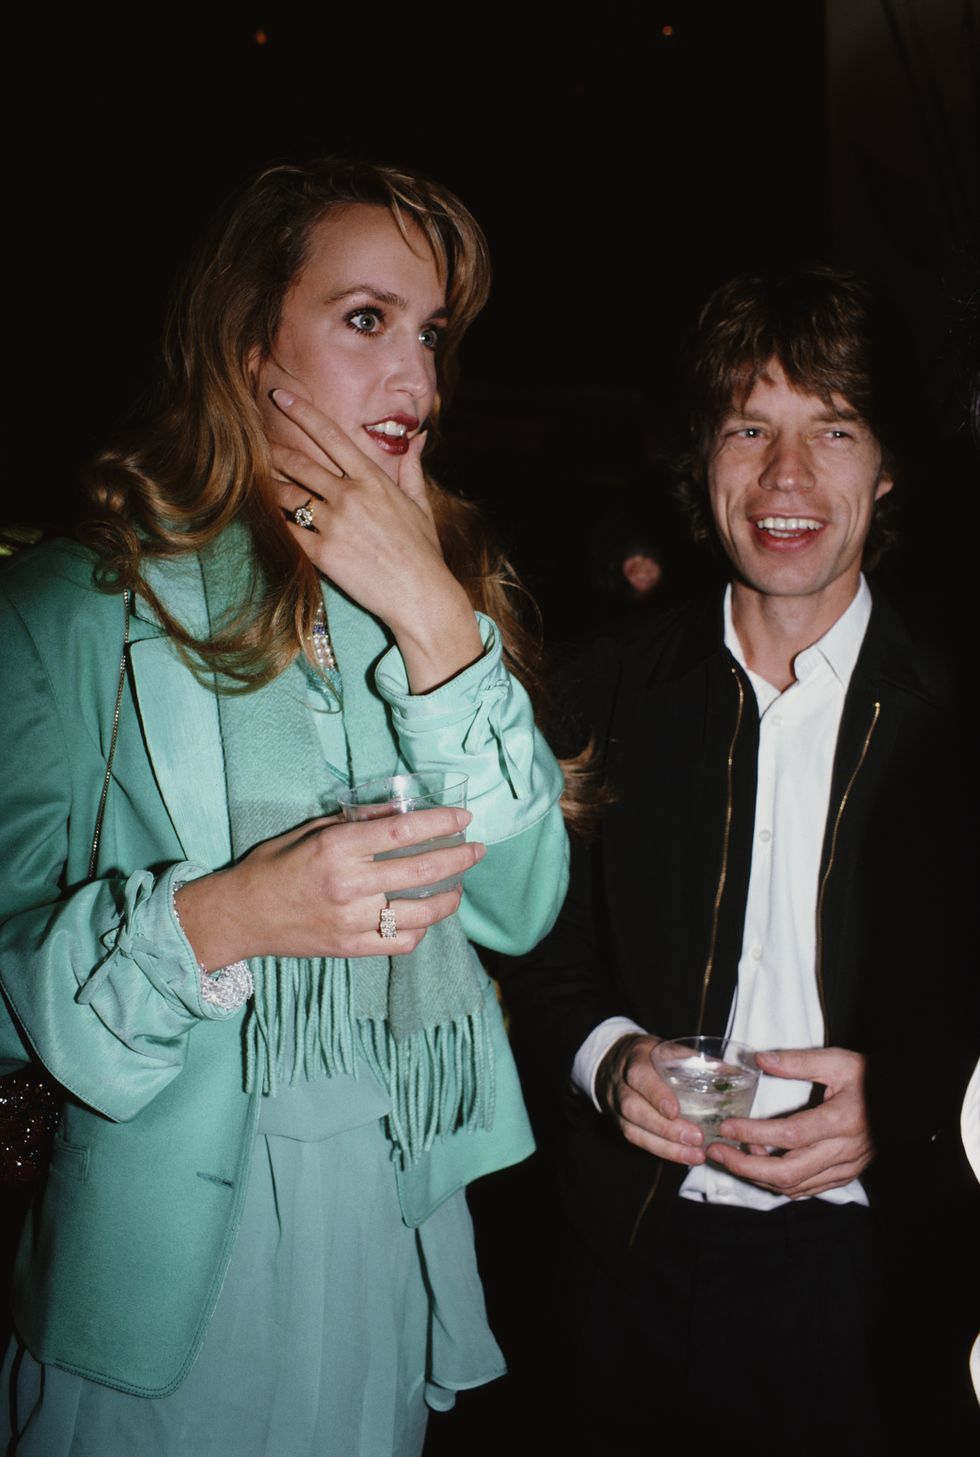 english musician and singer songwriter mick jagger with his girlfriend american model and actress jerry hall attend an event being held at bloomingdales department store, new york city, usa, 1980 photo by rose hartmanarchive photosgetty images